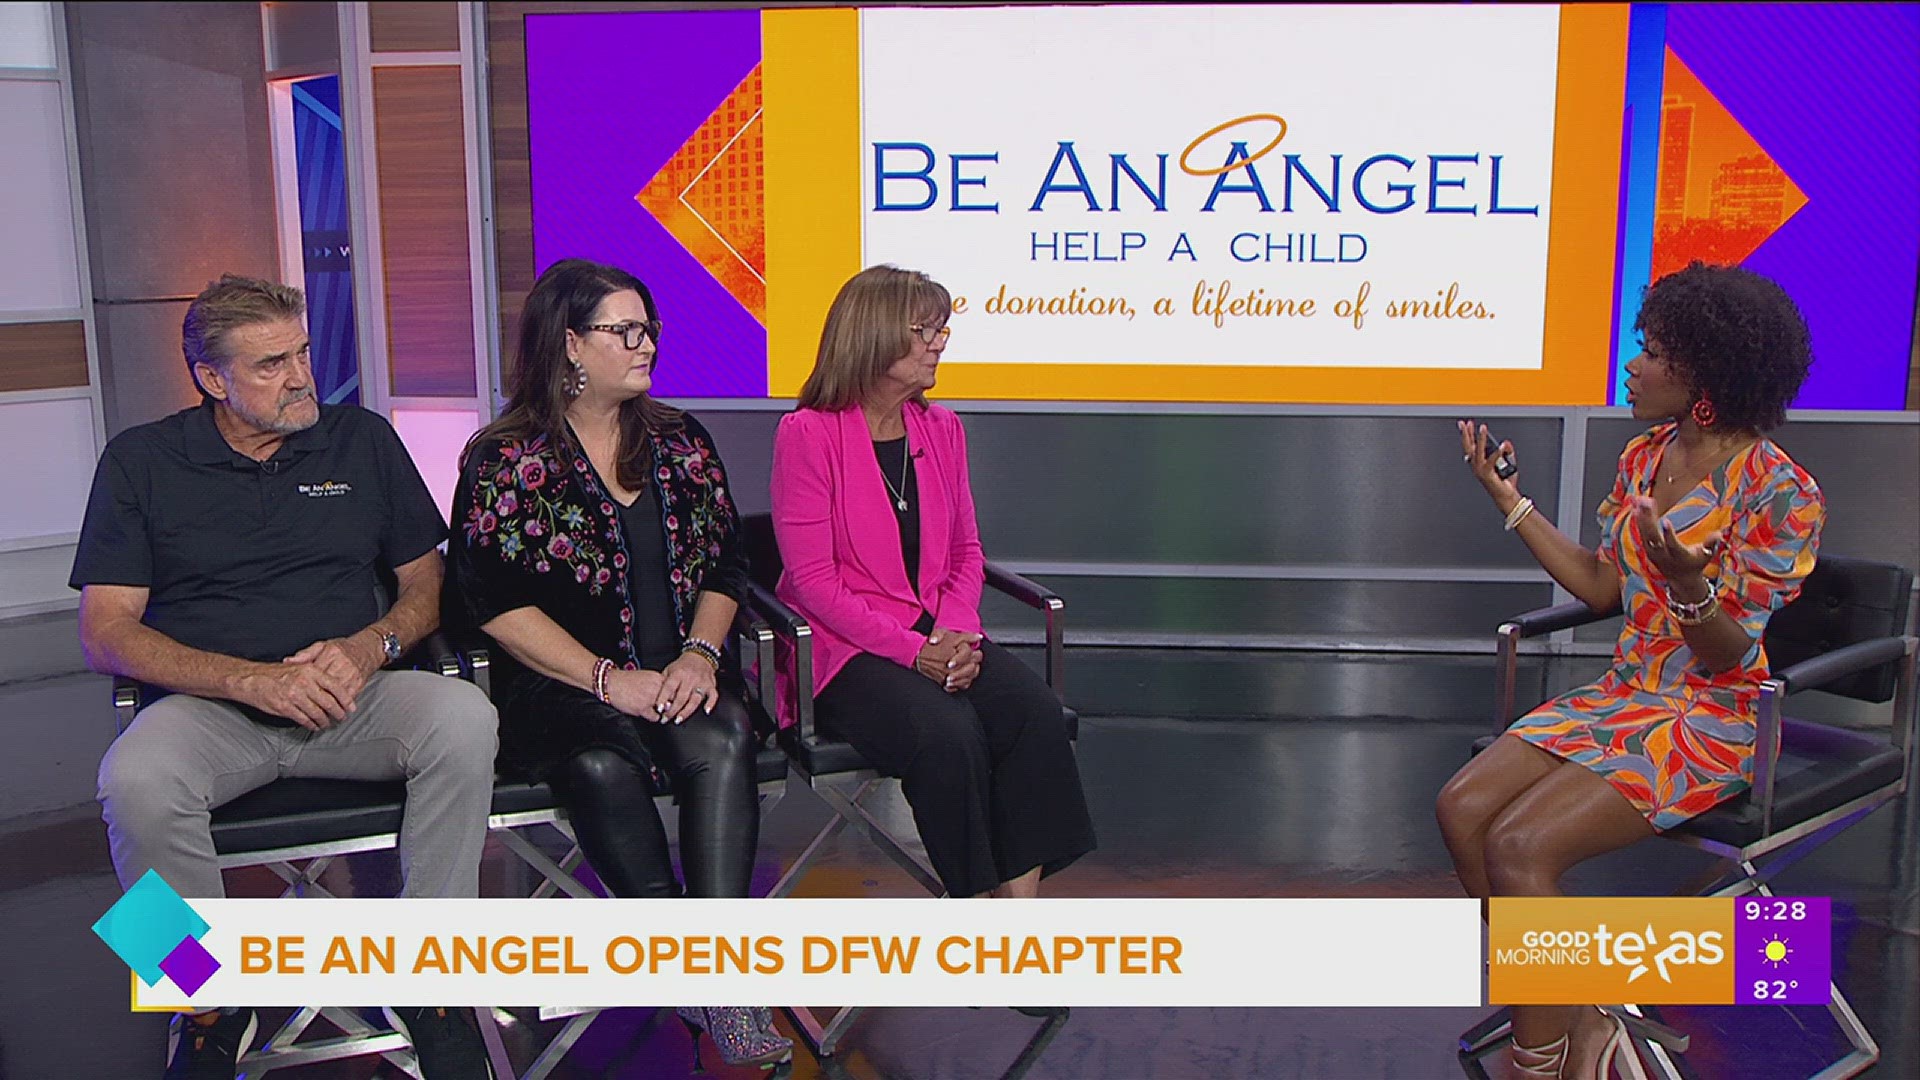 Find out how you can benefit Be An Angel. Go to beanangel.org/dfw for more information.